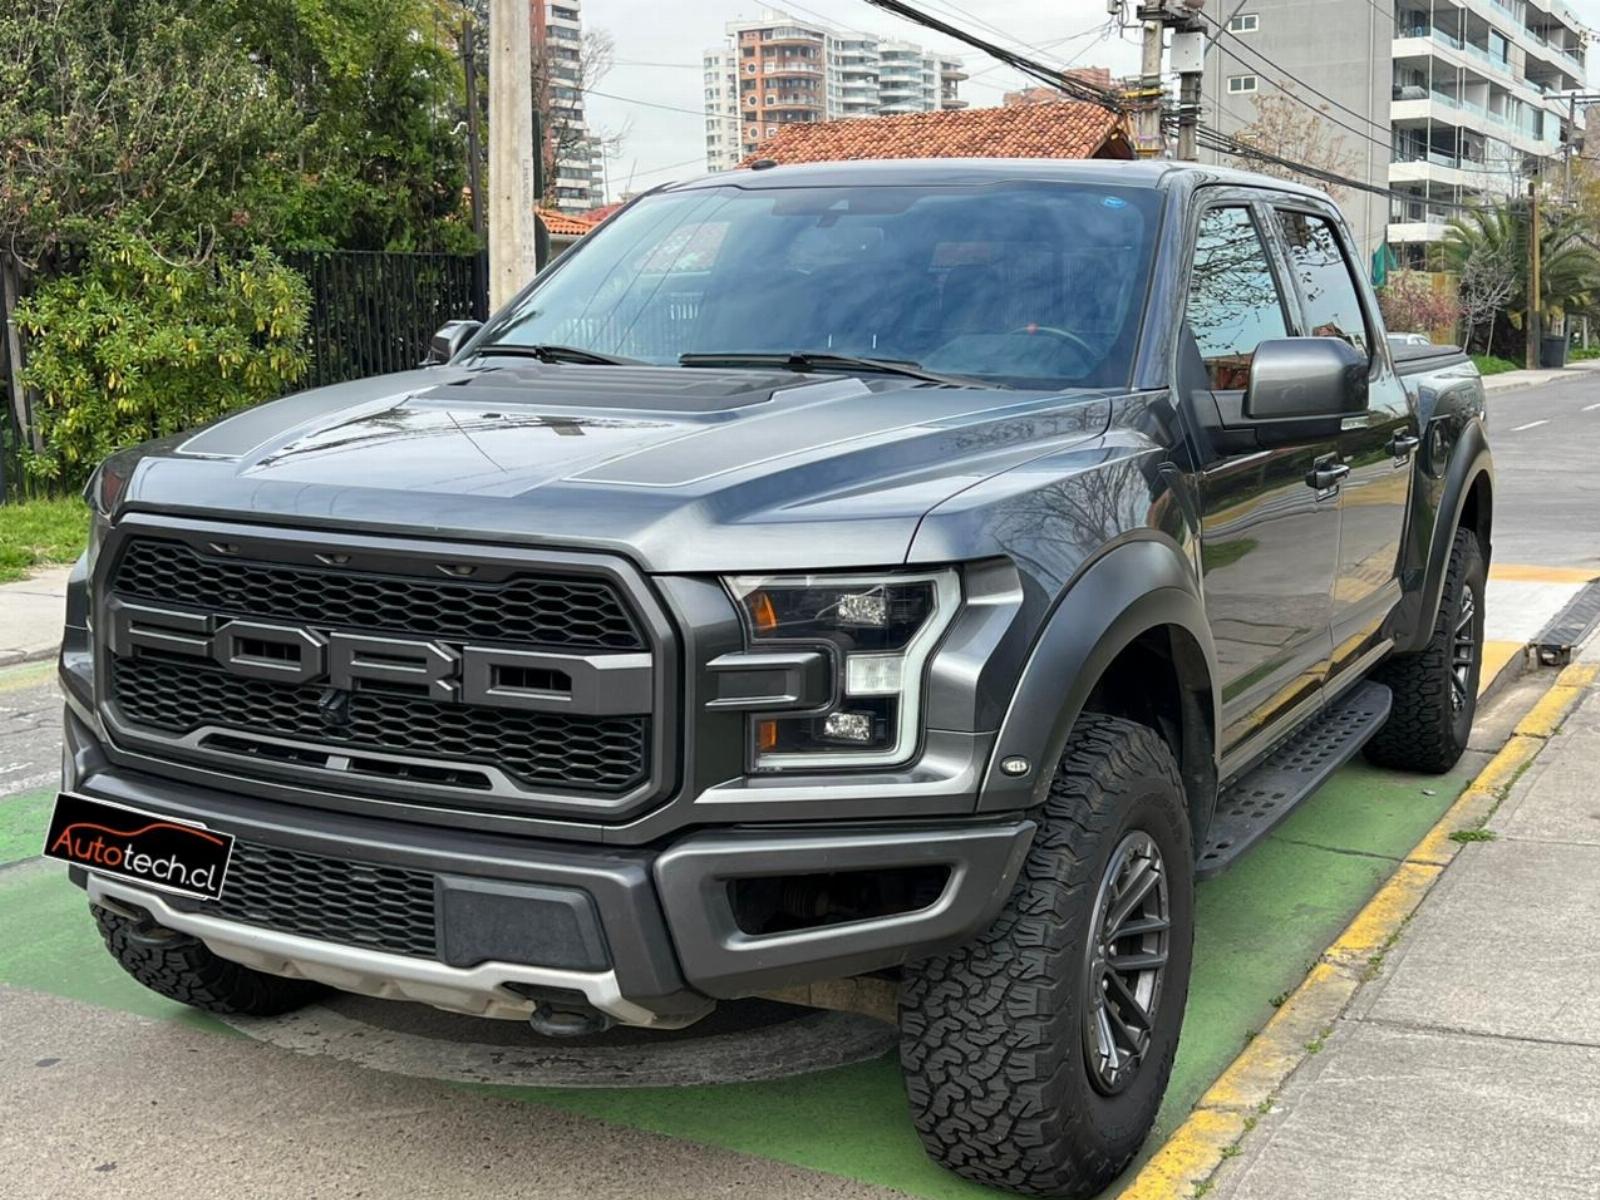 FORD F-150 Ford F-150 3.5 Raptor Auto Ecoboost 4WD 2021 Ford F-150 3.5 Raptor Auto Ecoboost 4WD - 